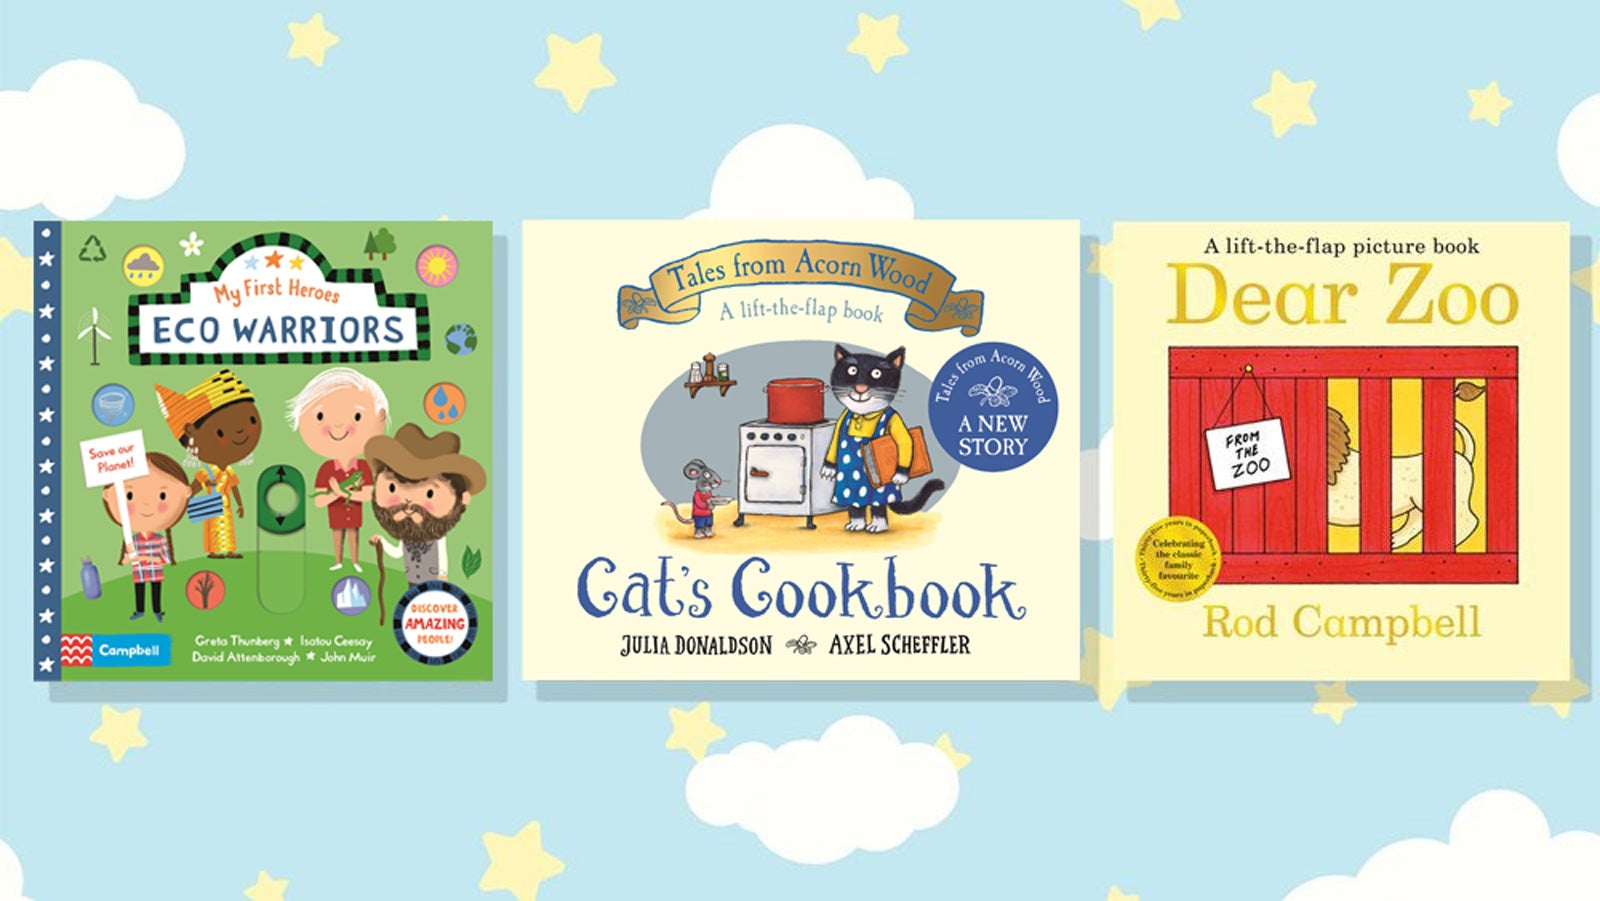 Books covers for Eco arriors, Cat's Cookbook and Dear Zoo against the background of an illustrated blue sky